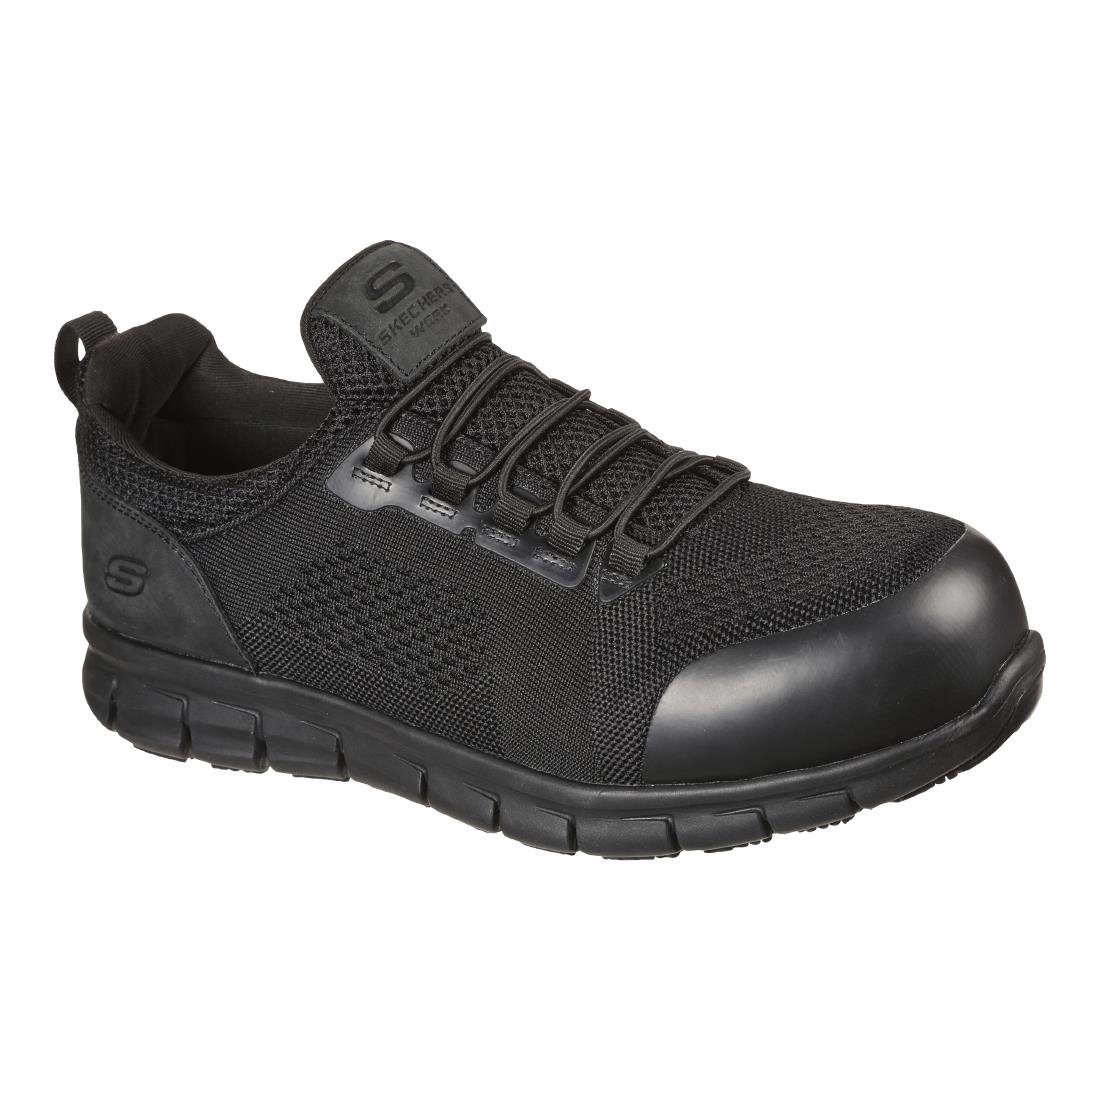 BB675-46 Skechers Safety Shoe with Steel Toe Cap Size 46 JD Catering Equipment Solutions Ltd